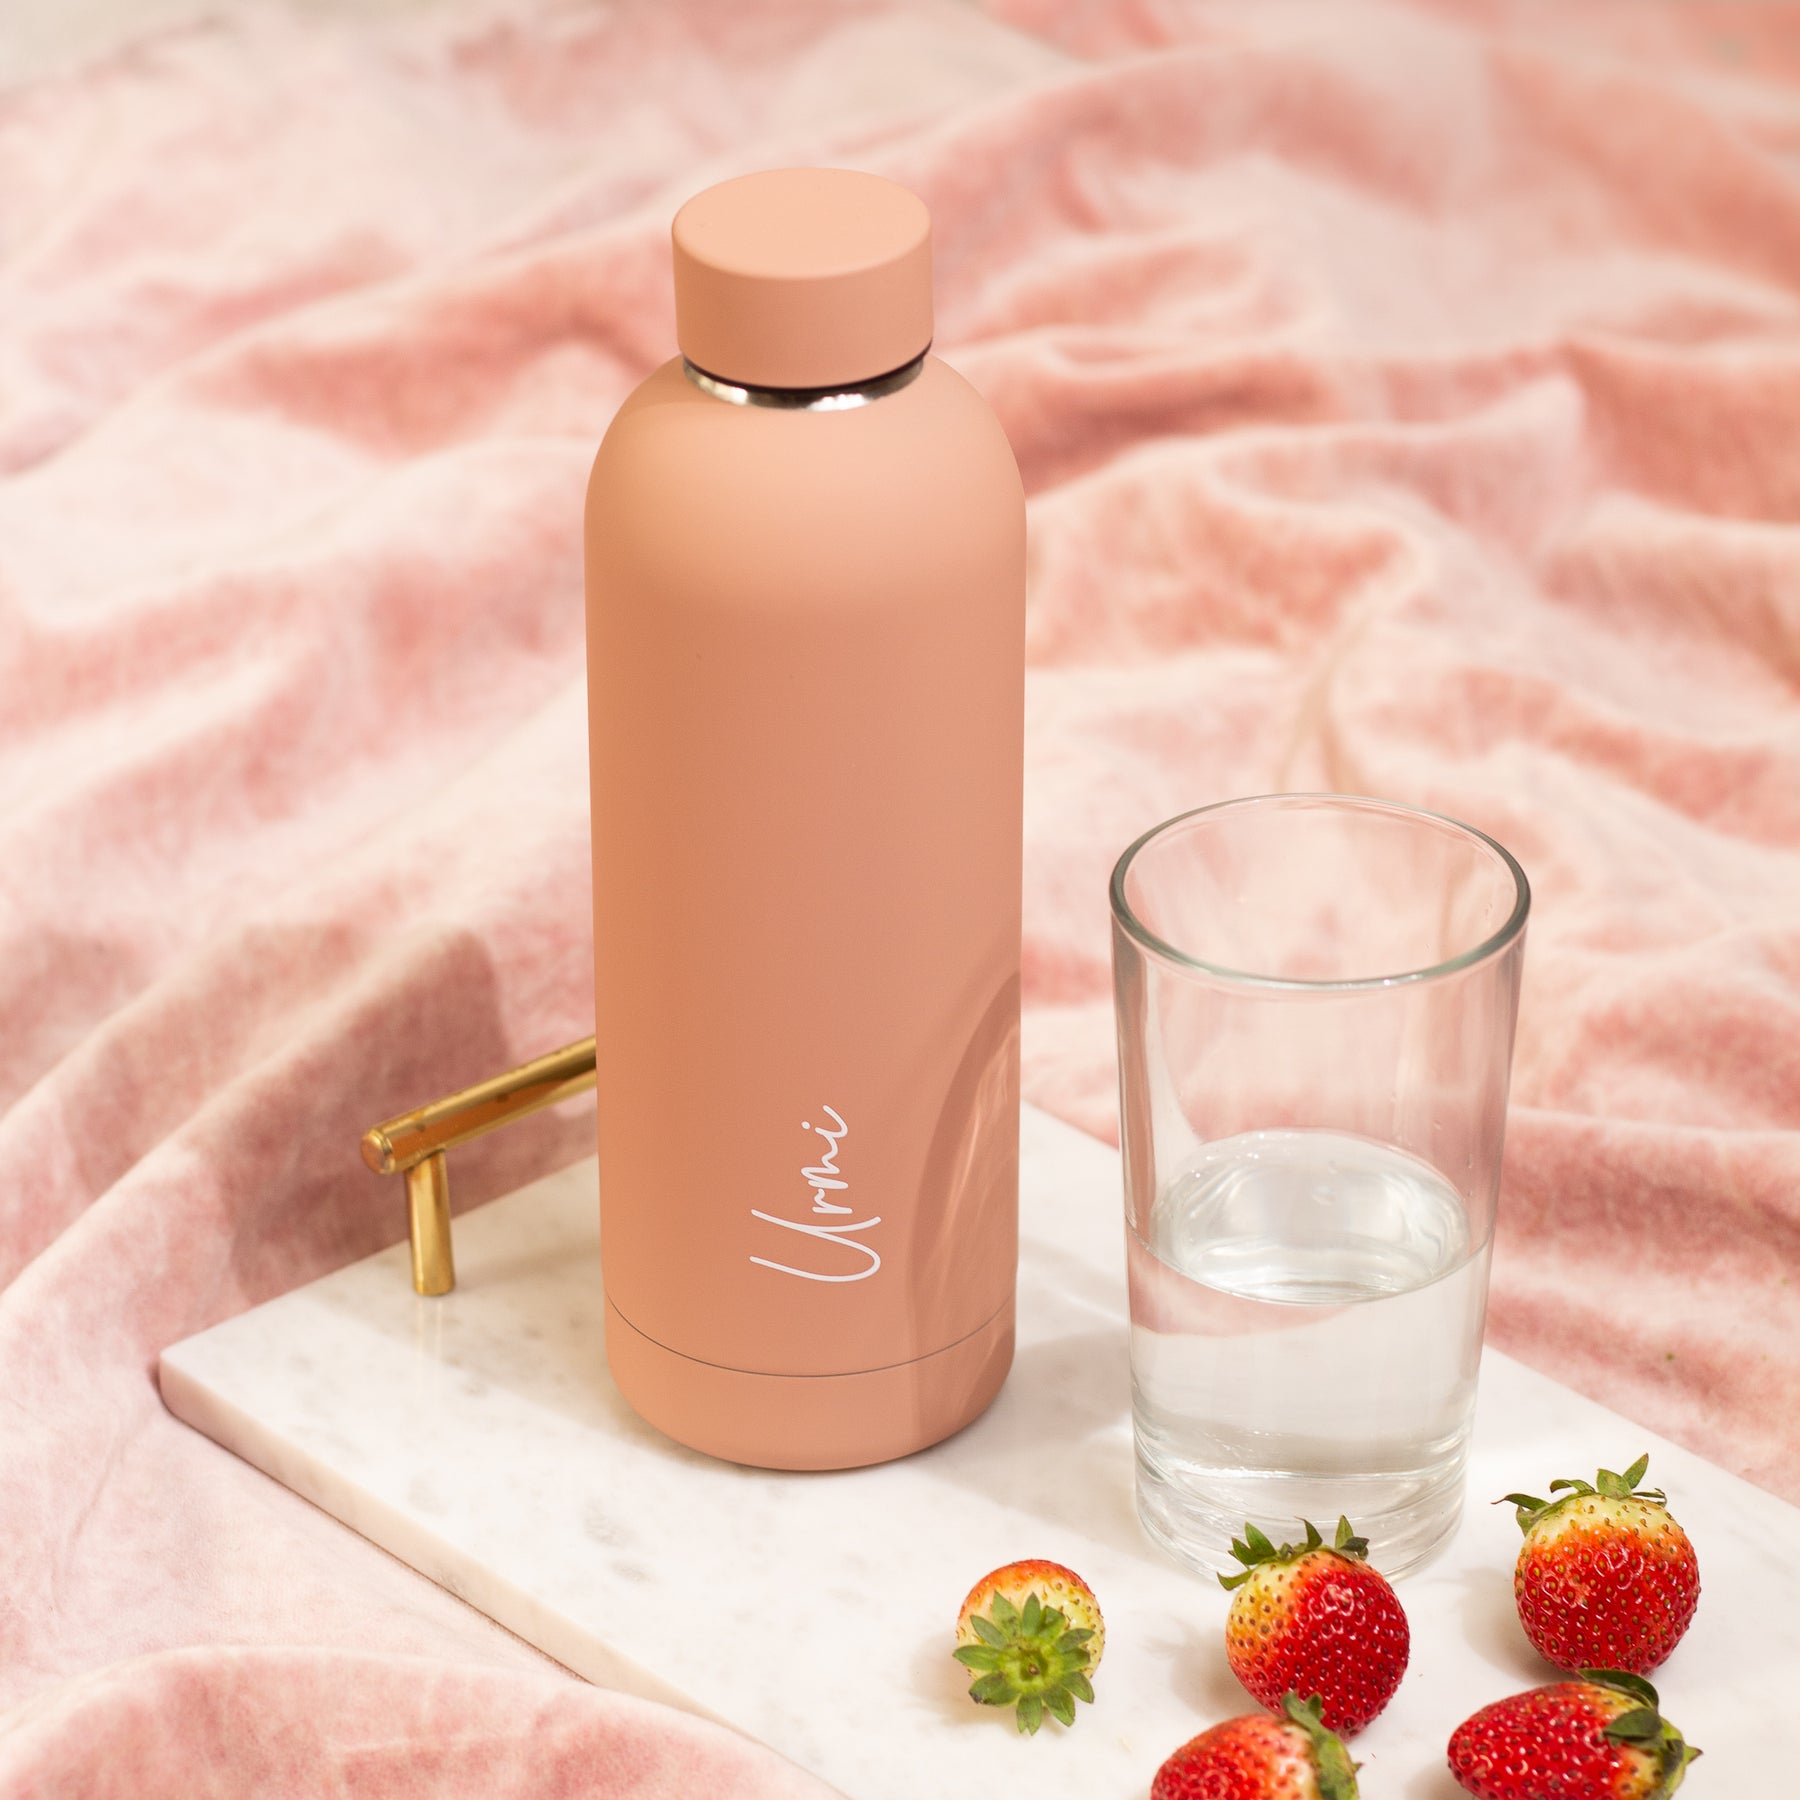 Quench - Personalised Water Bottle - Warm Peach